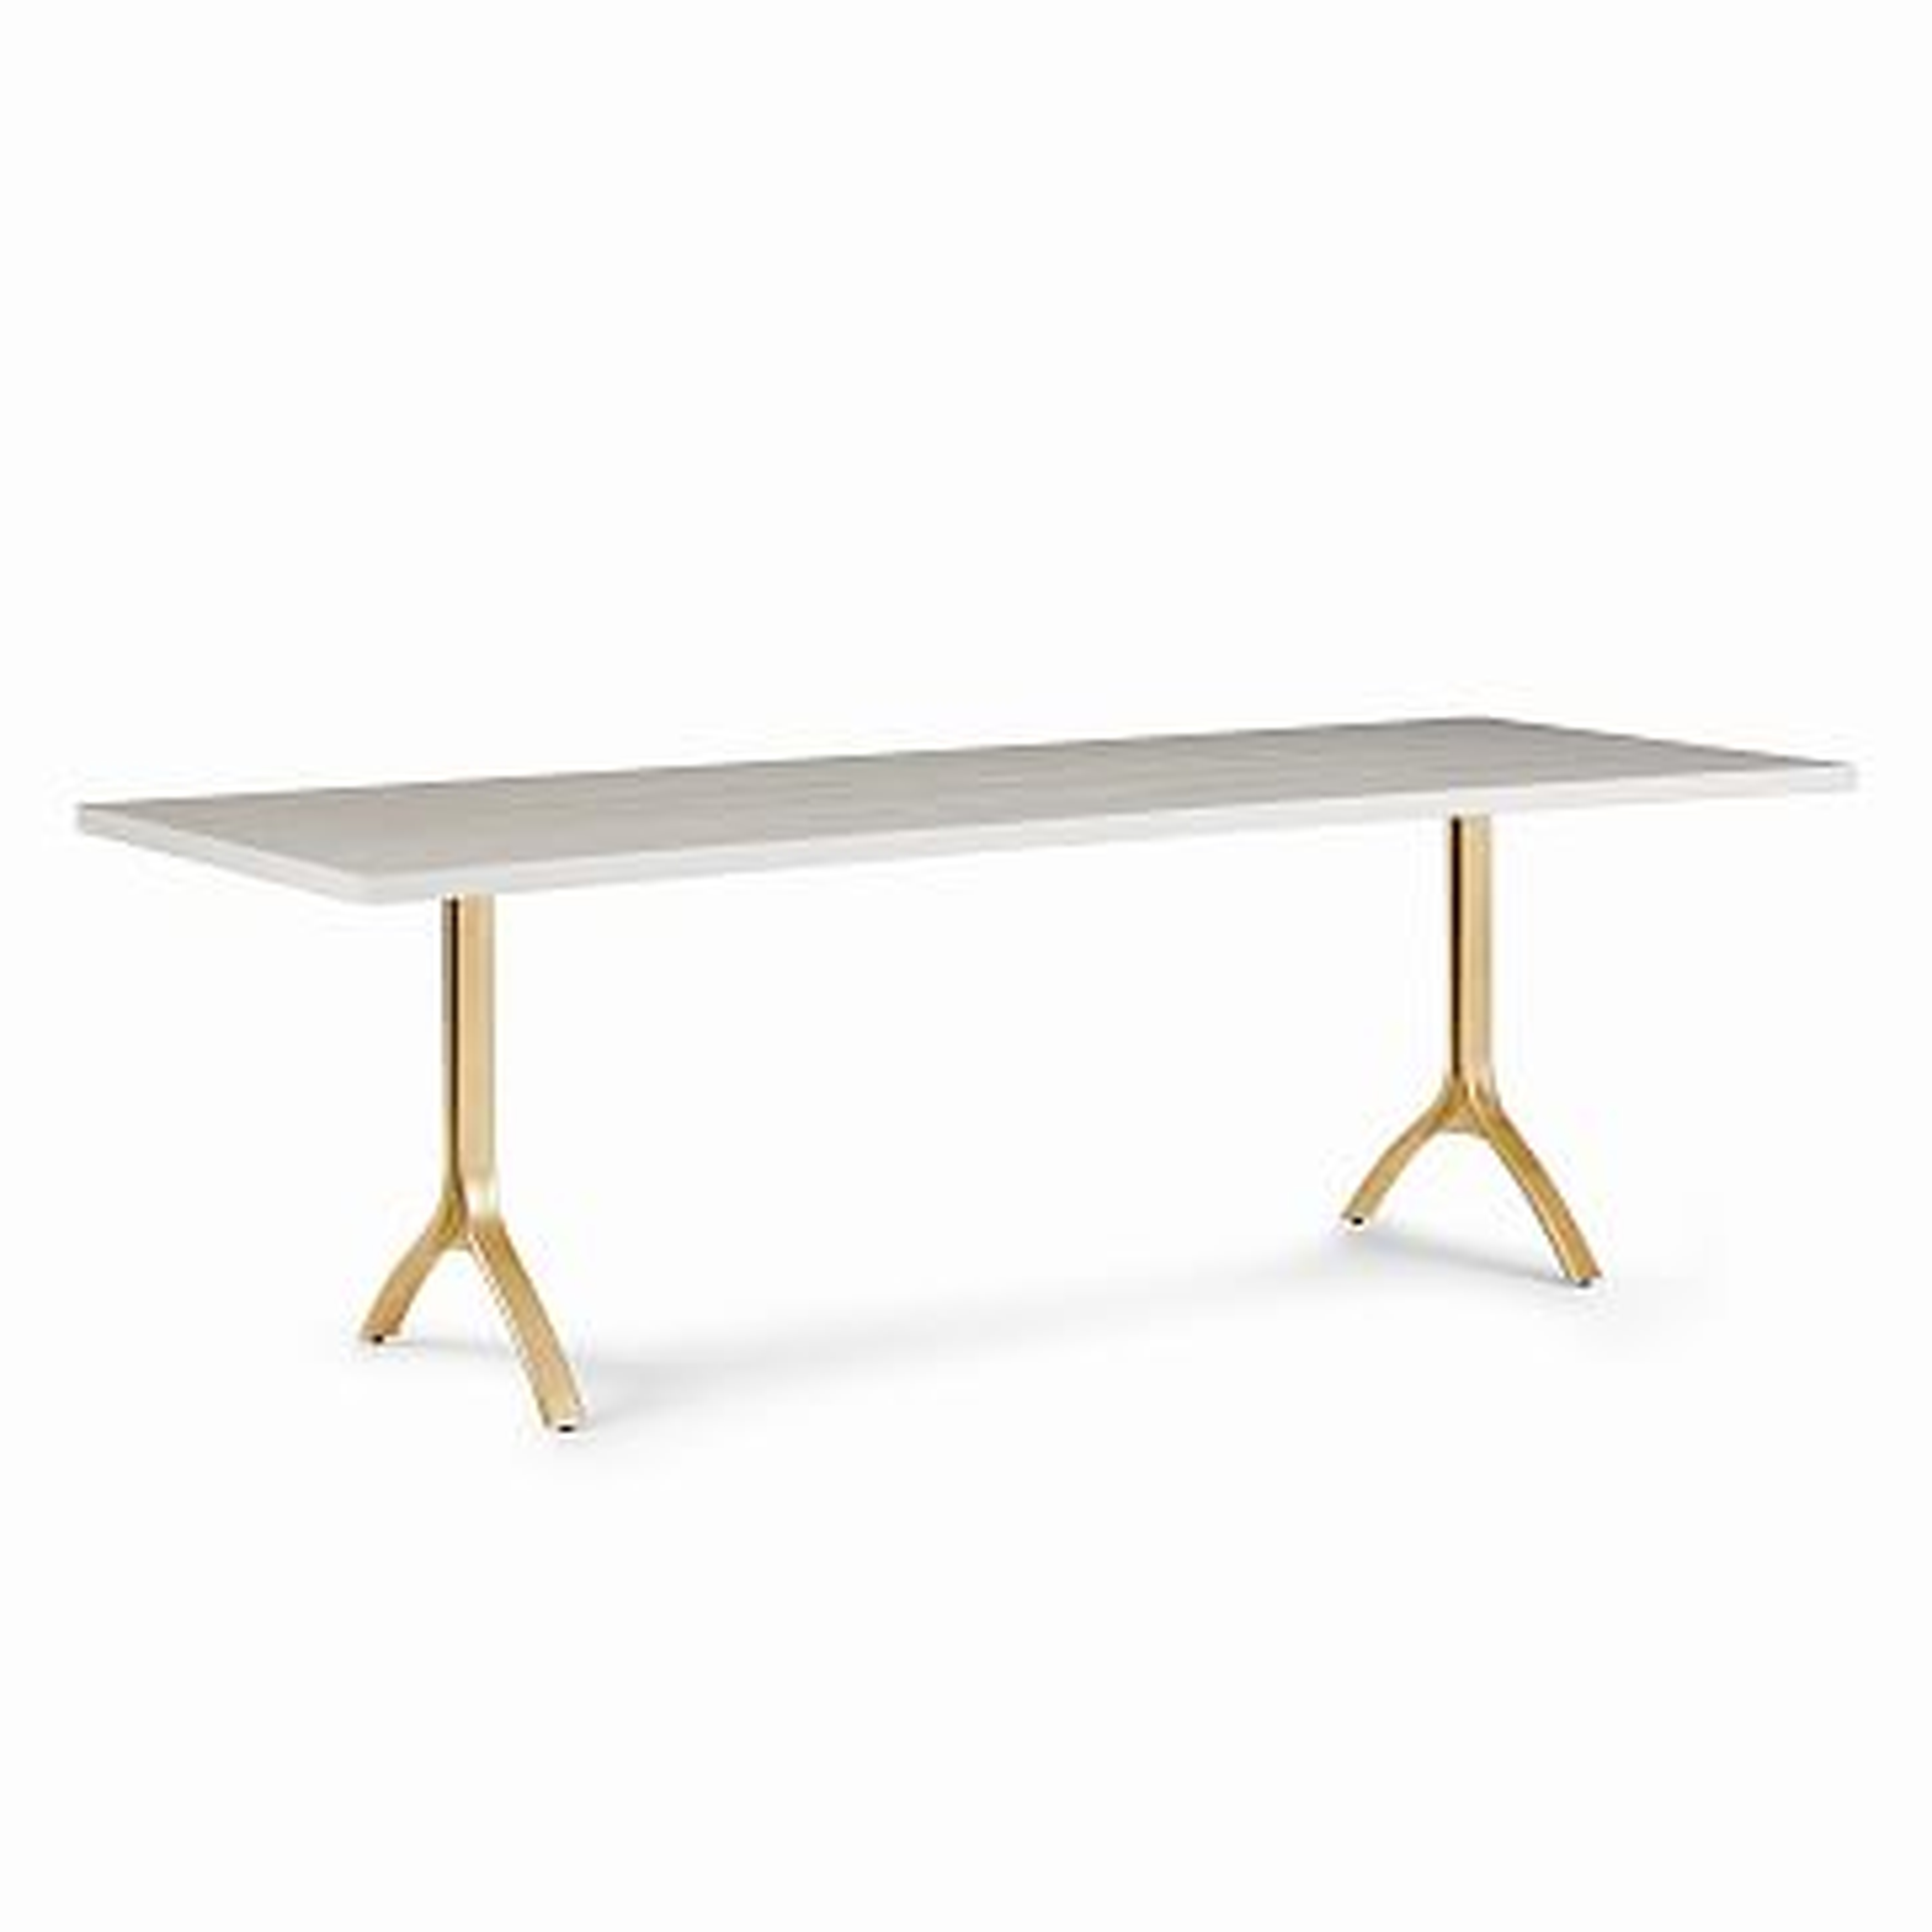 Avery 94" Wishbone Dining Table, Winter Wood, Antique Brass - West Elm